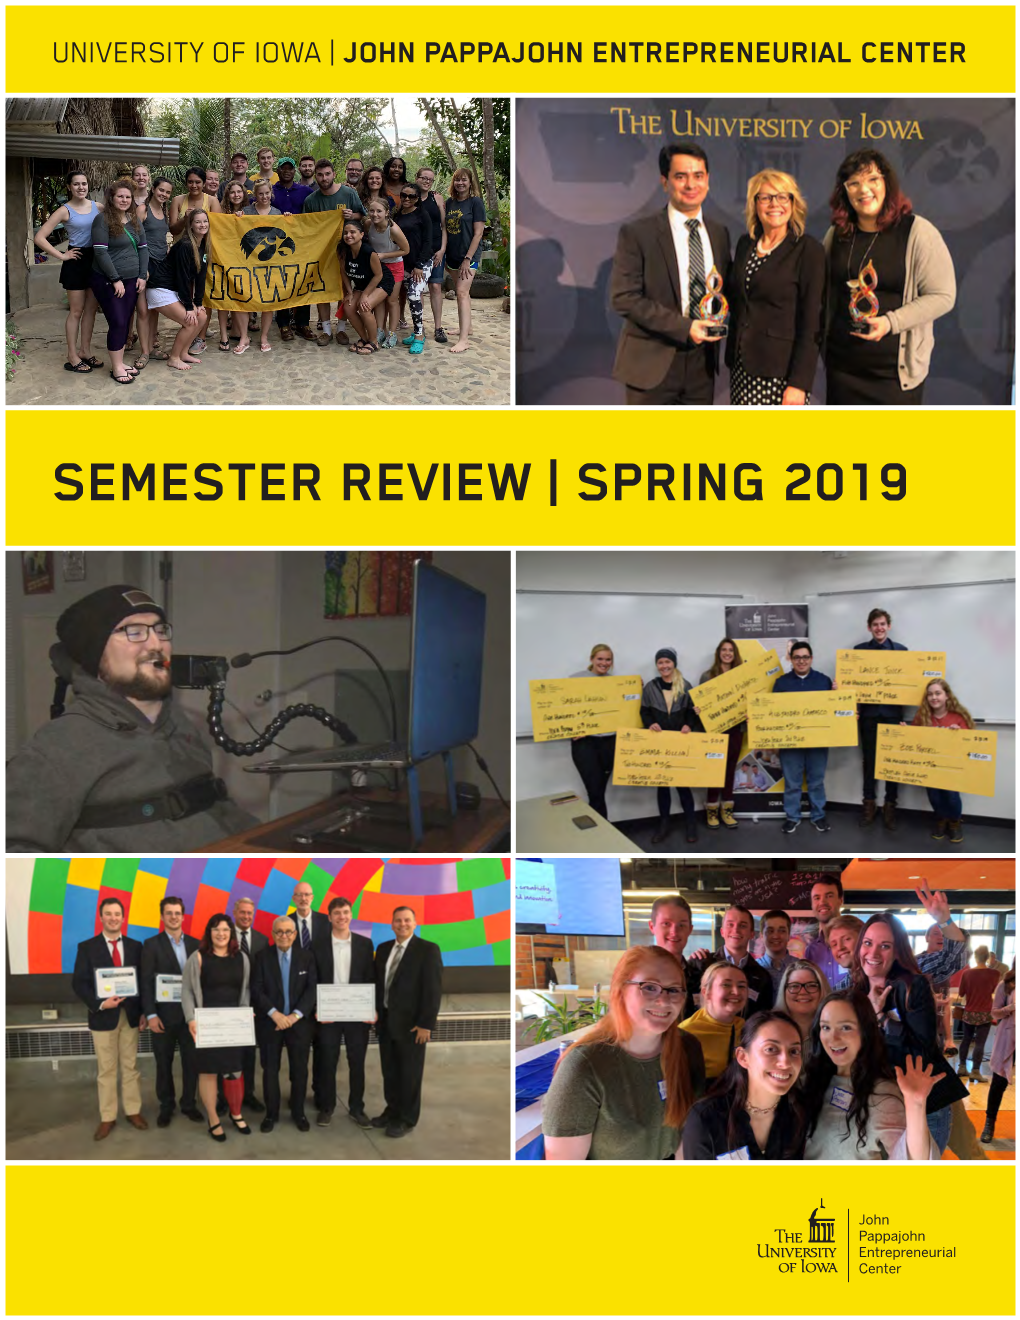 SEMESTER REVIEW | SPRING 2019 Contents